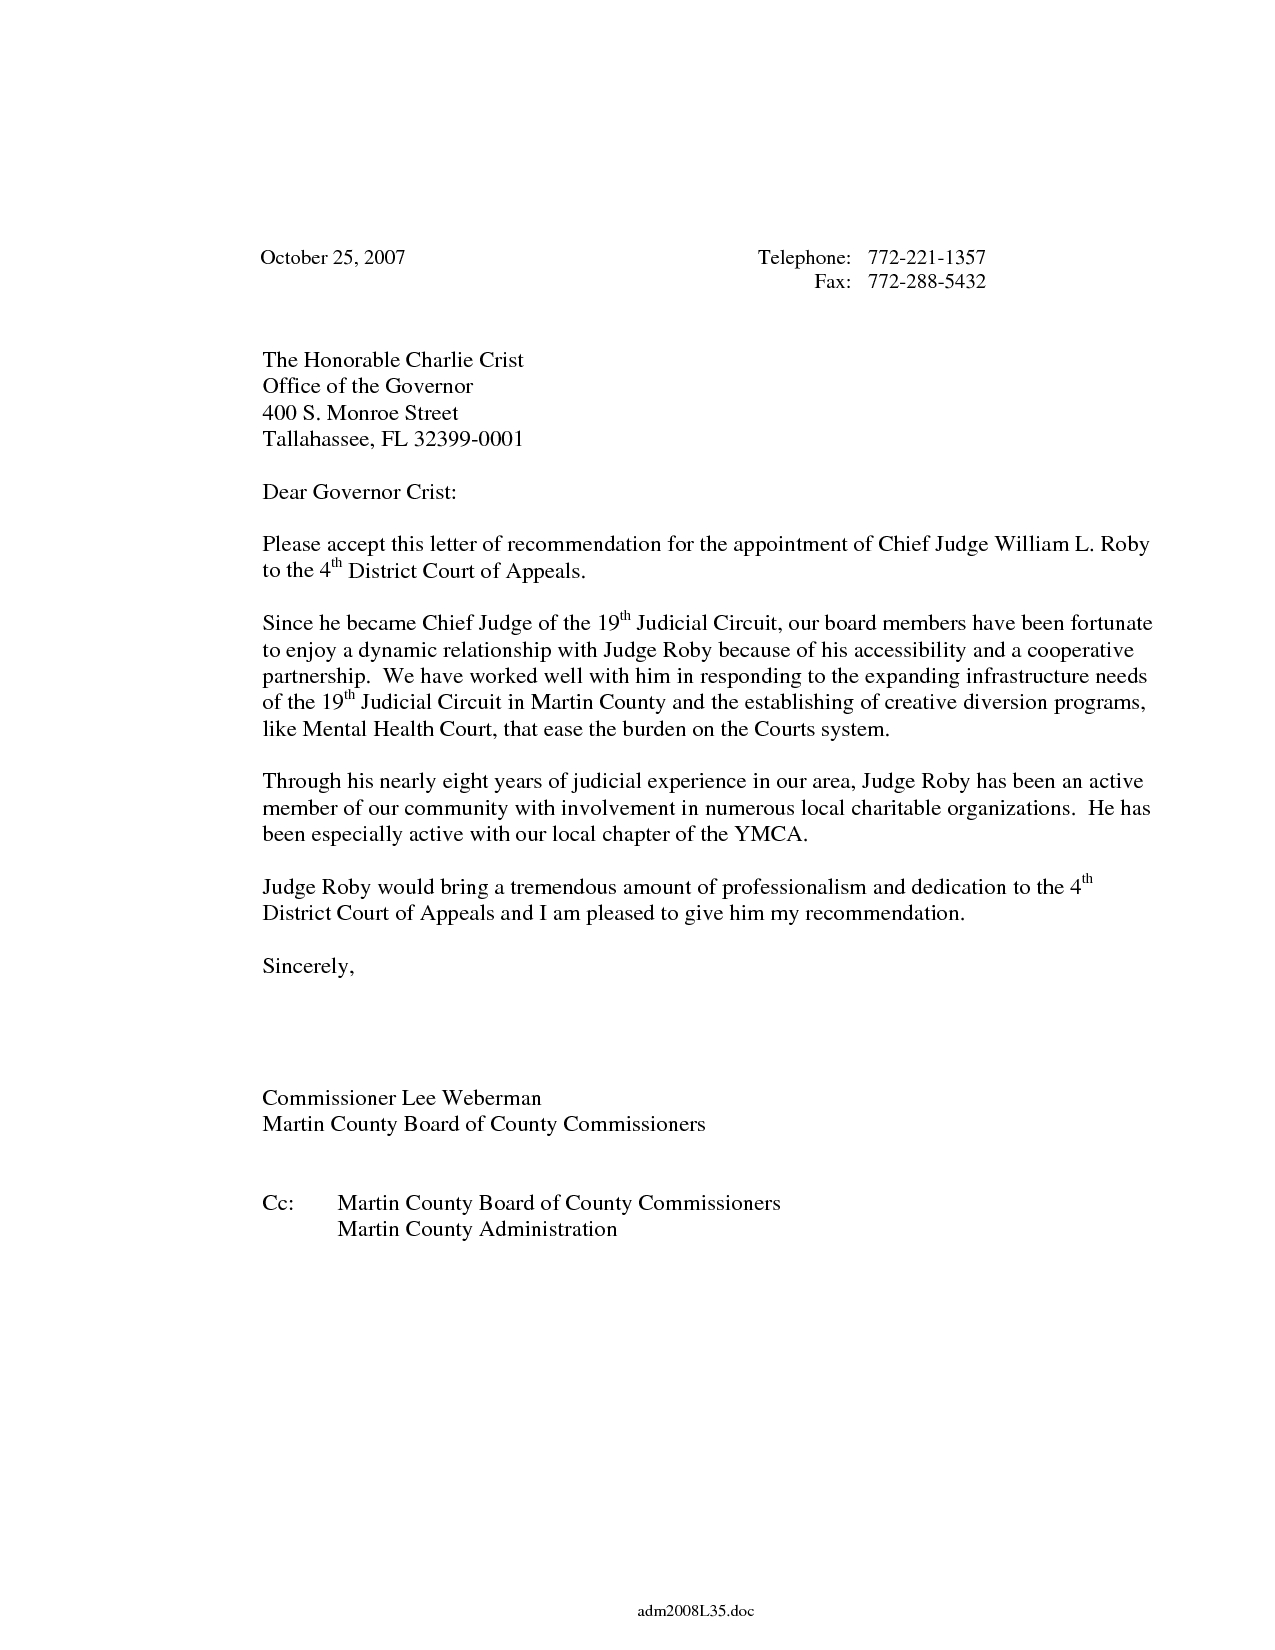 Recommendation Letter For Judge Enom for sizing 1275 X 1650